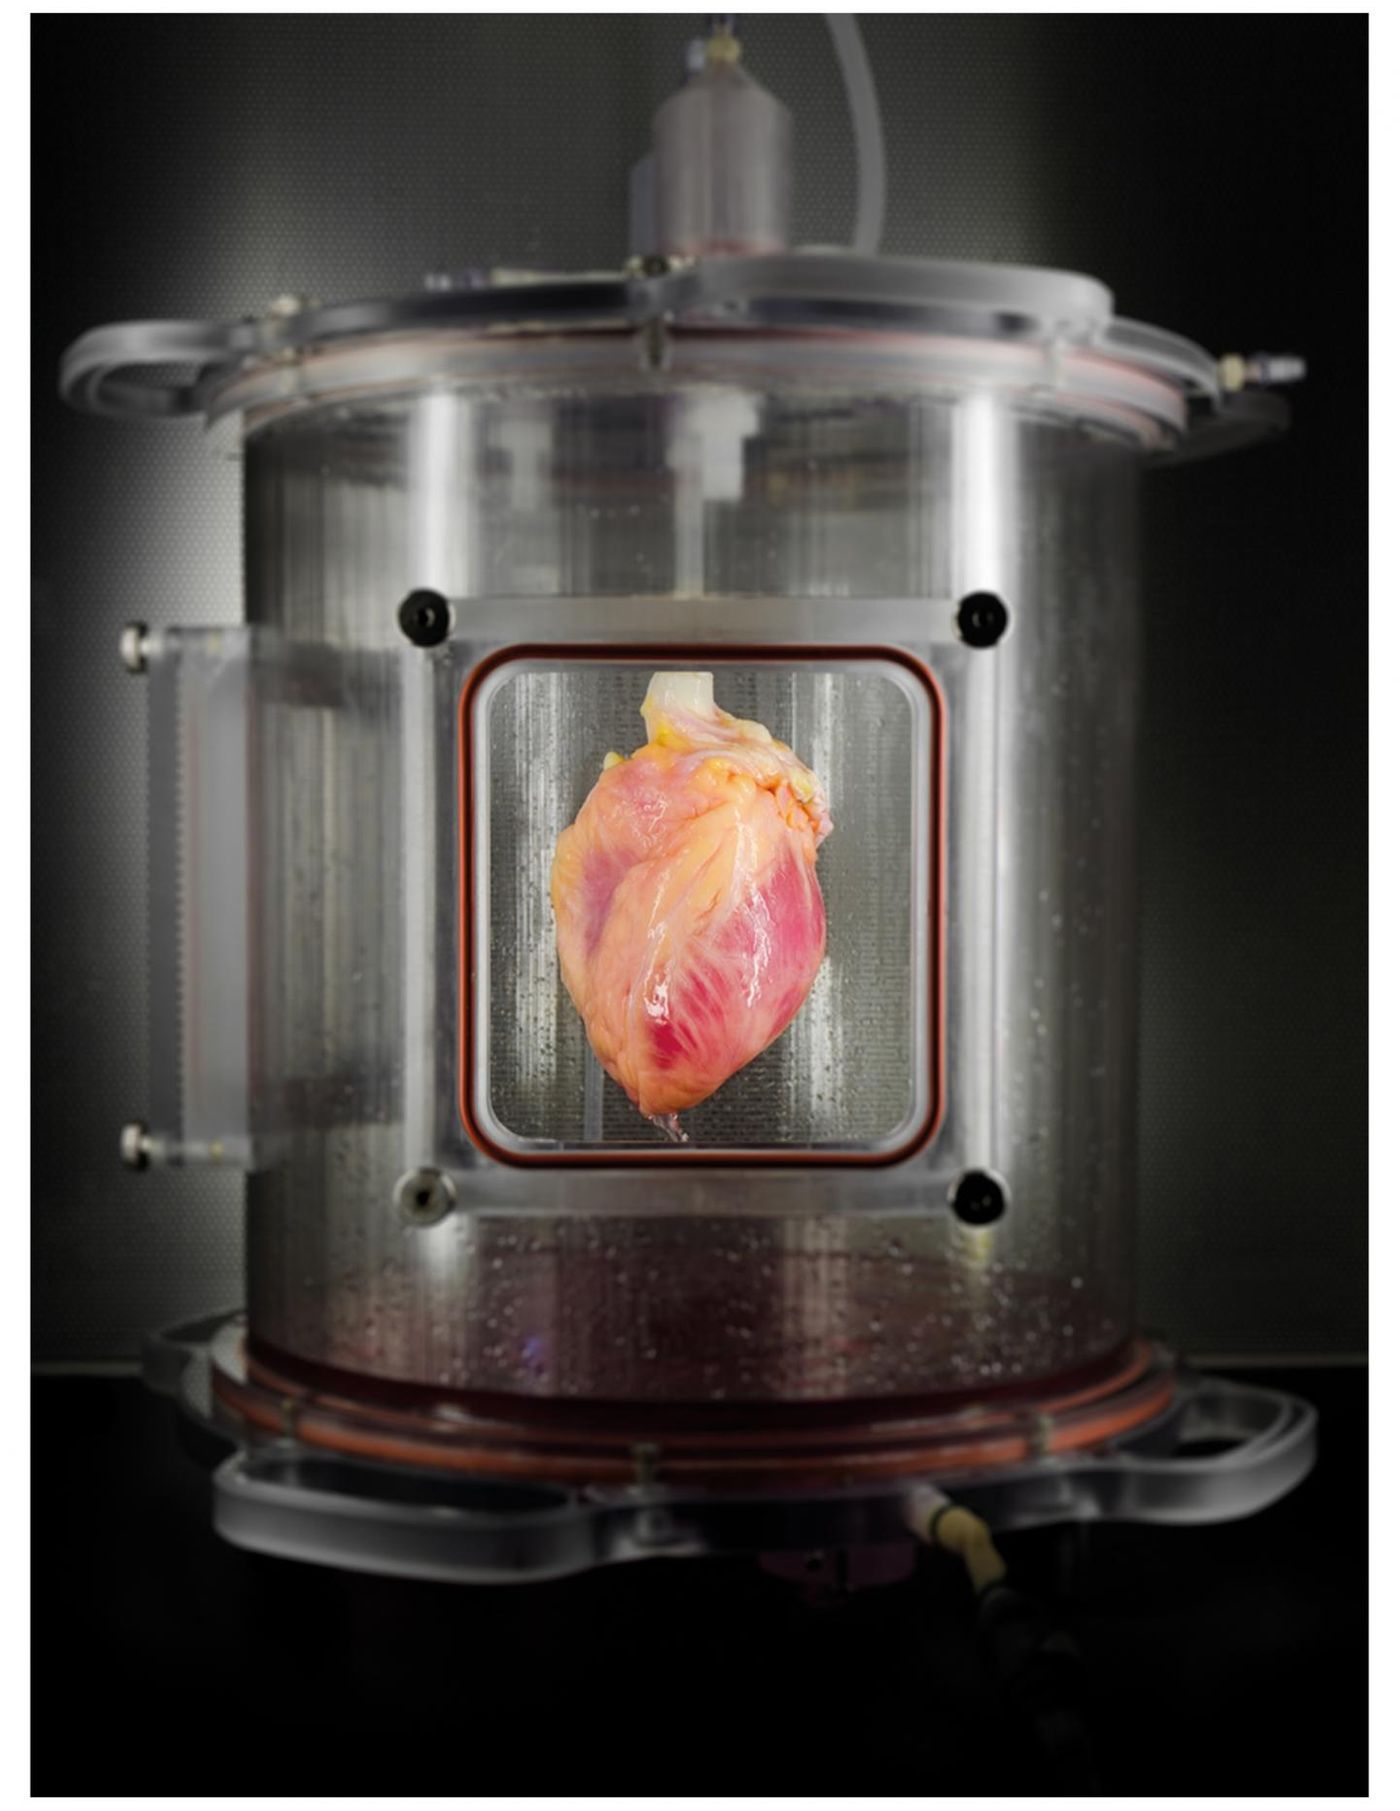 A partially recellularized human whole-heart cardiac scaffold, reseeded with human cardiomyocytes derived from induced pluripotent stem cells, being cultured in a bioreactor that delivers a nutrient solution and replicates some of the environmental conditions around a living heart.